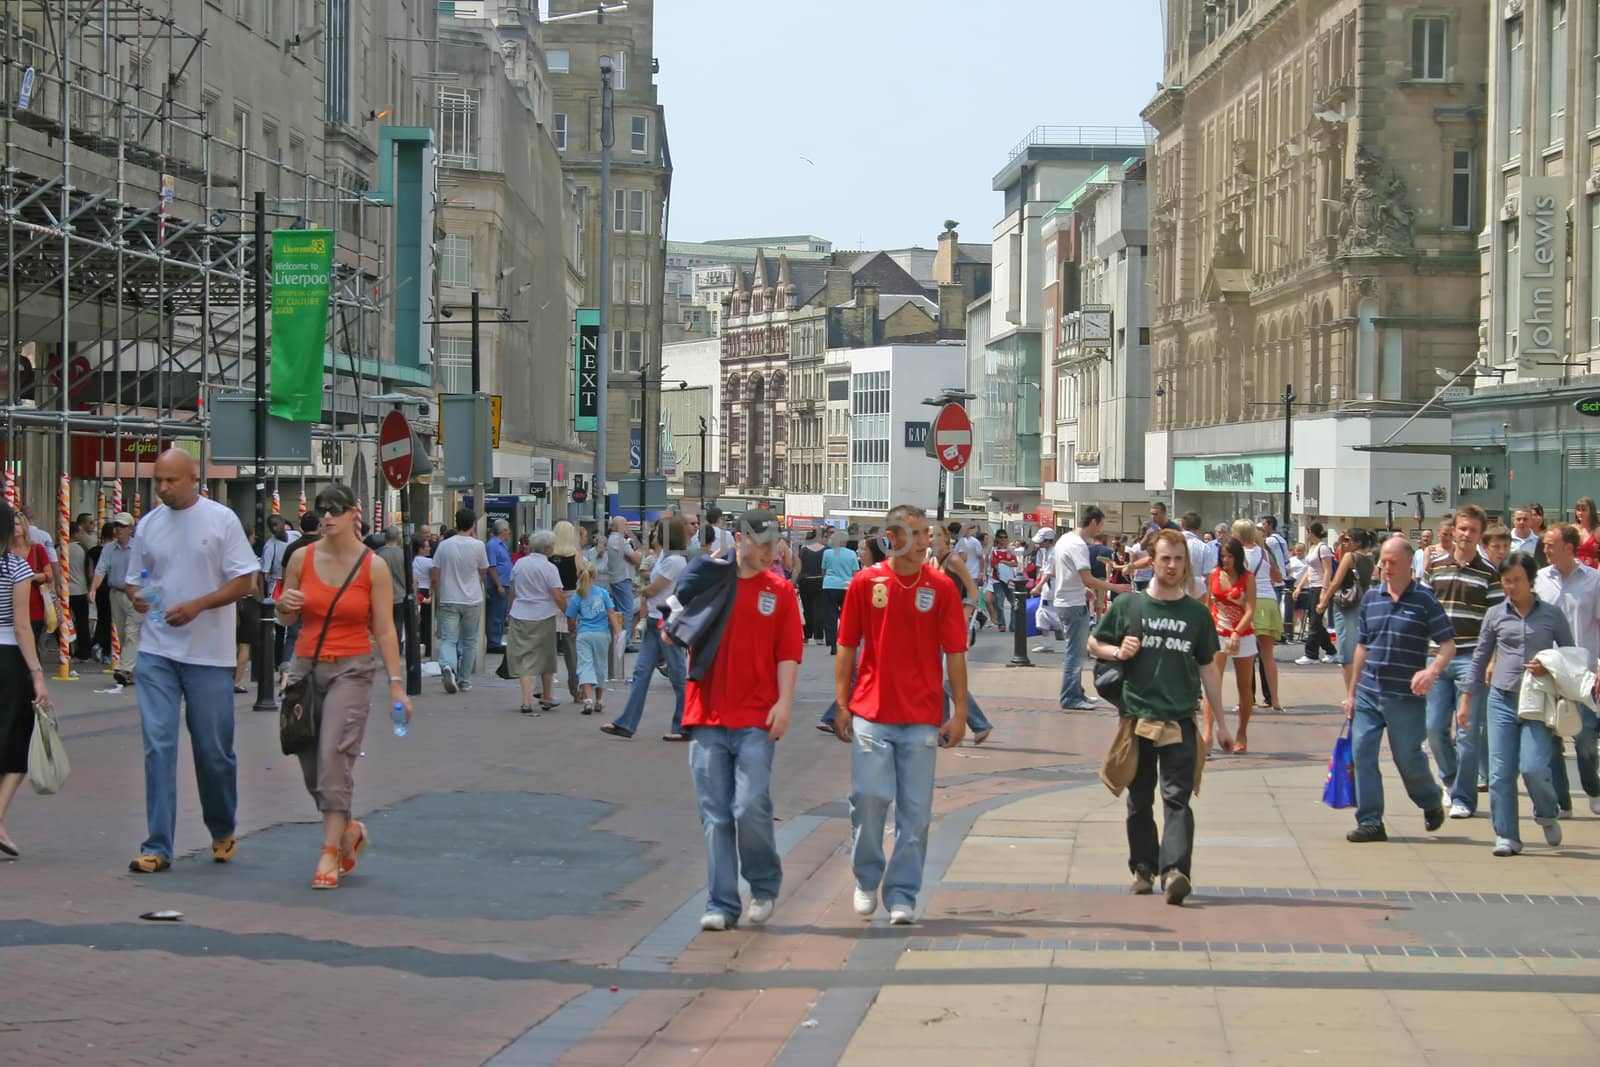 Shoppers in Liverpool by green308